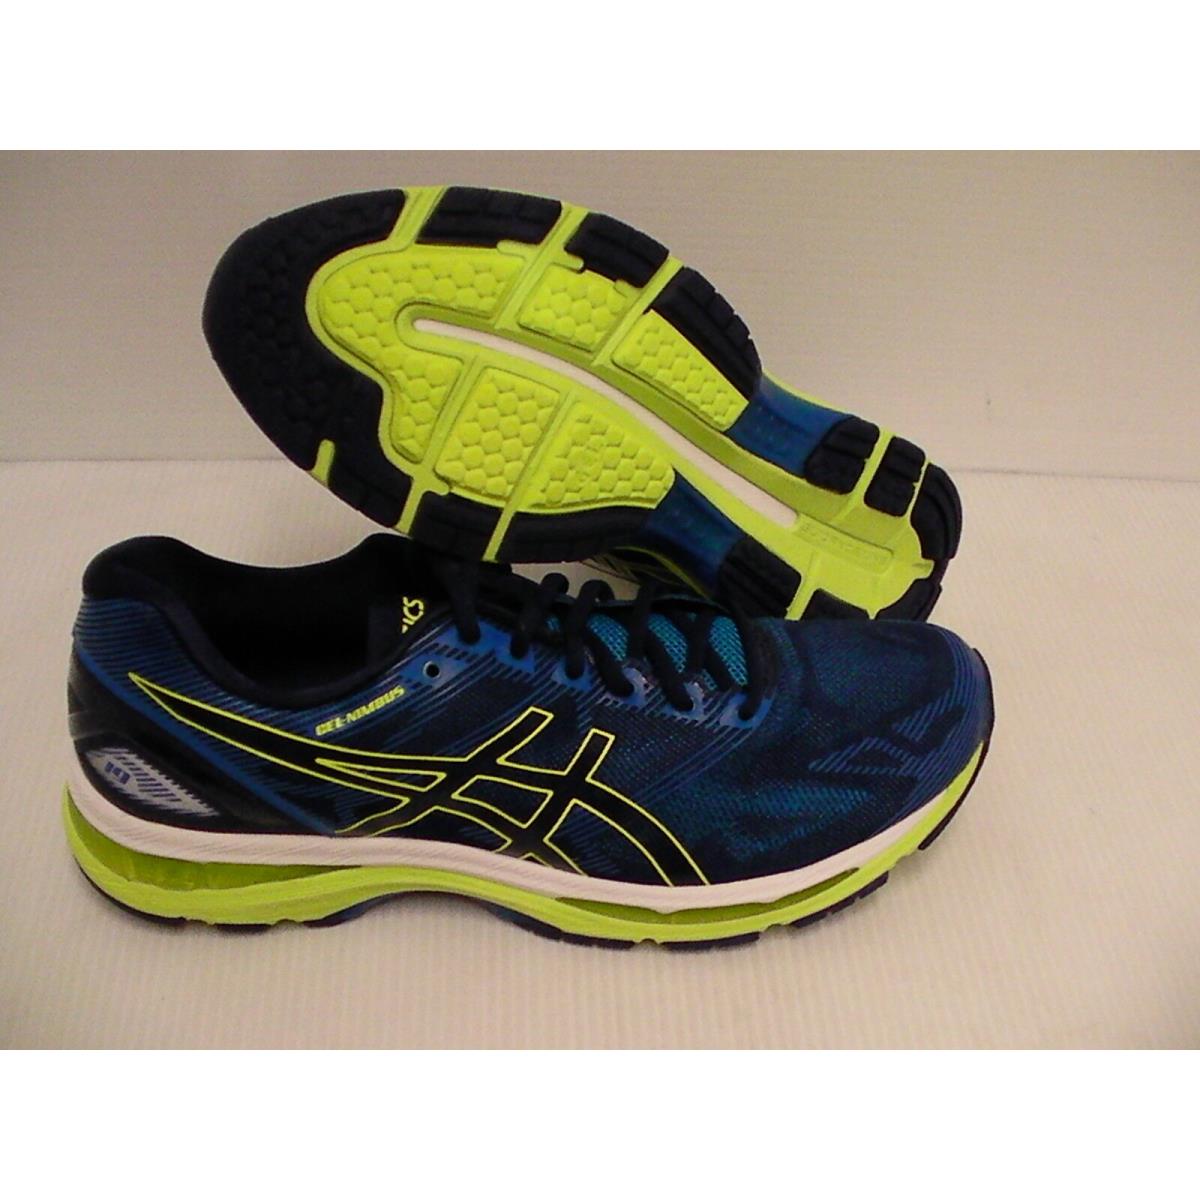 Very angry Mediate typist Mens Asics Running Shoes Gel Nimbus 19 Indigo Blue Safety Yellow Size 13 us  | 081328041814 - ASICS shoes Gel Nimbus - Multi-Color | SporTipTop